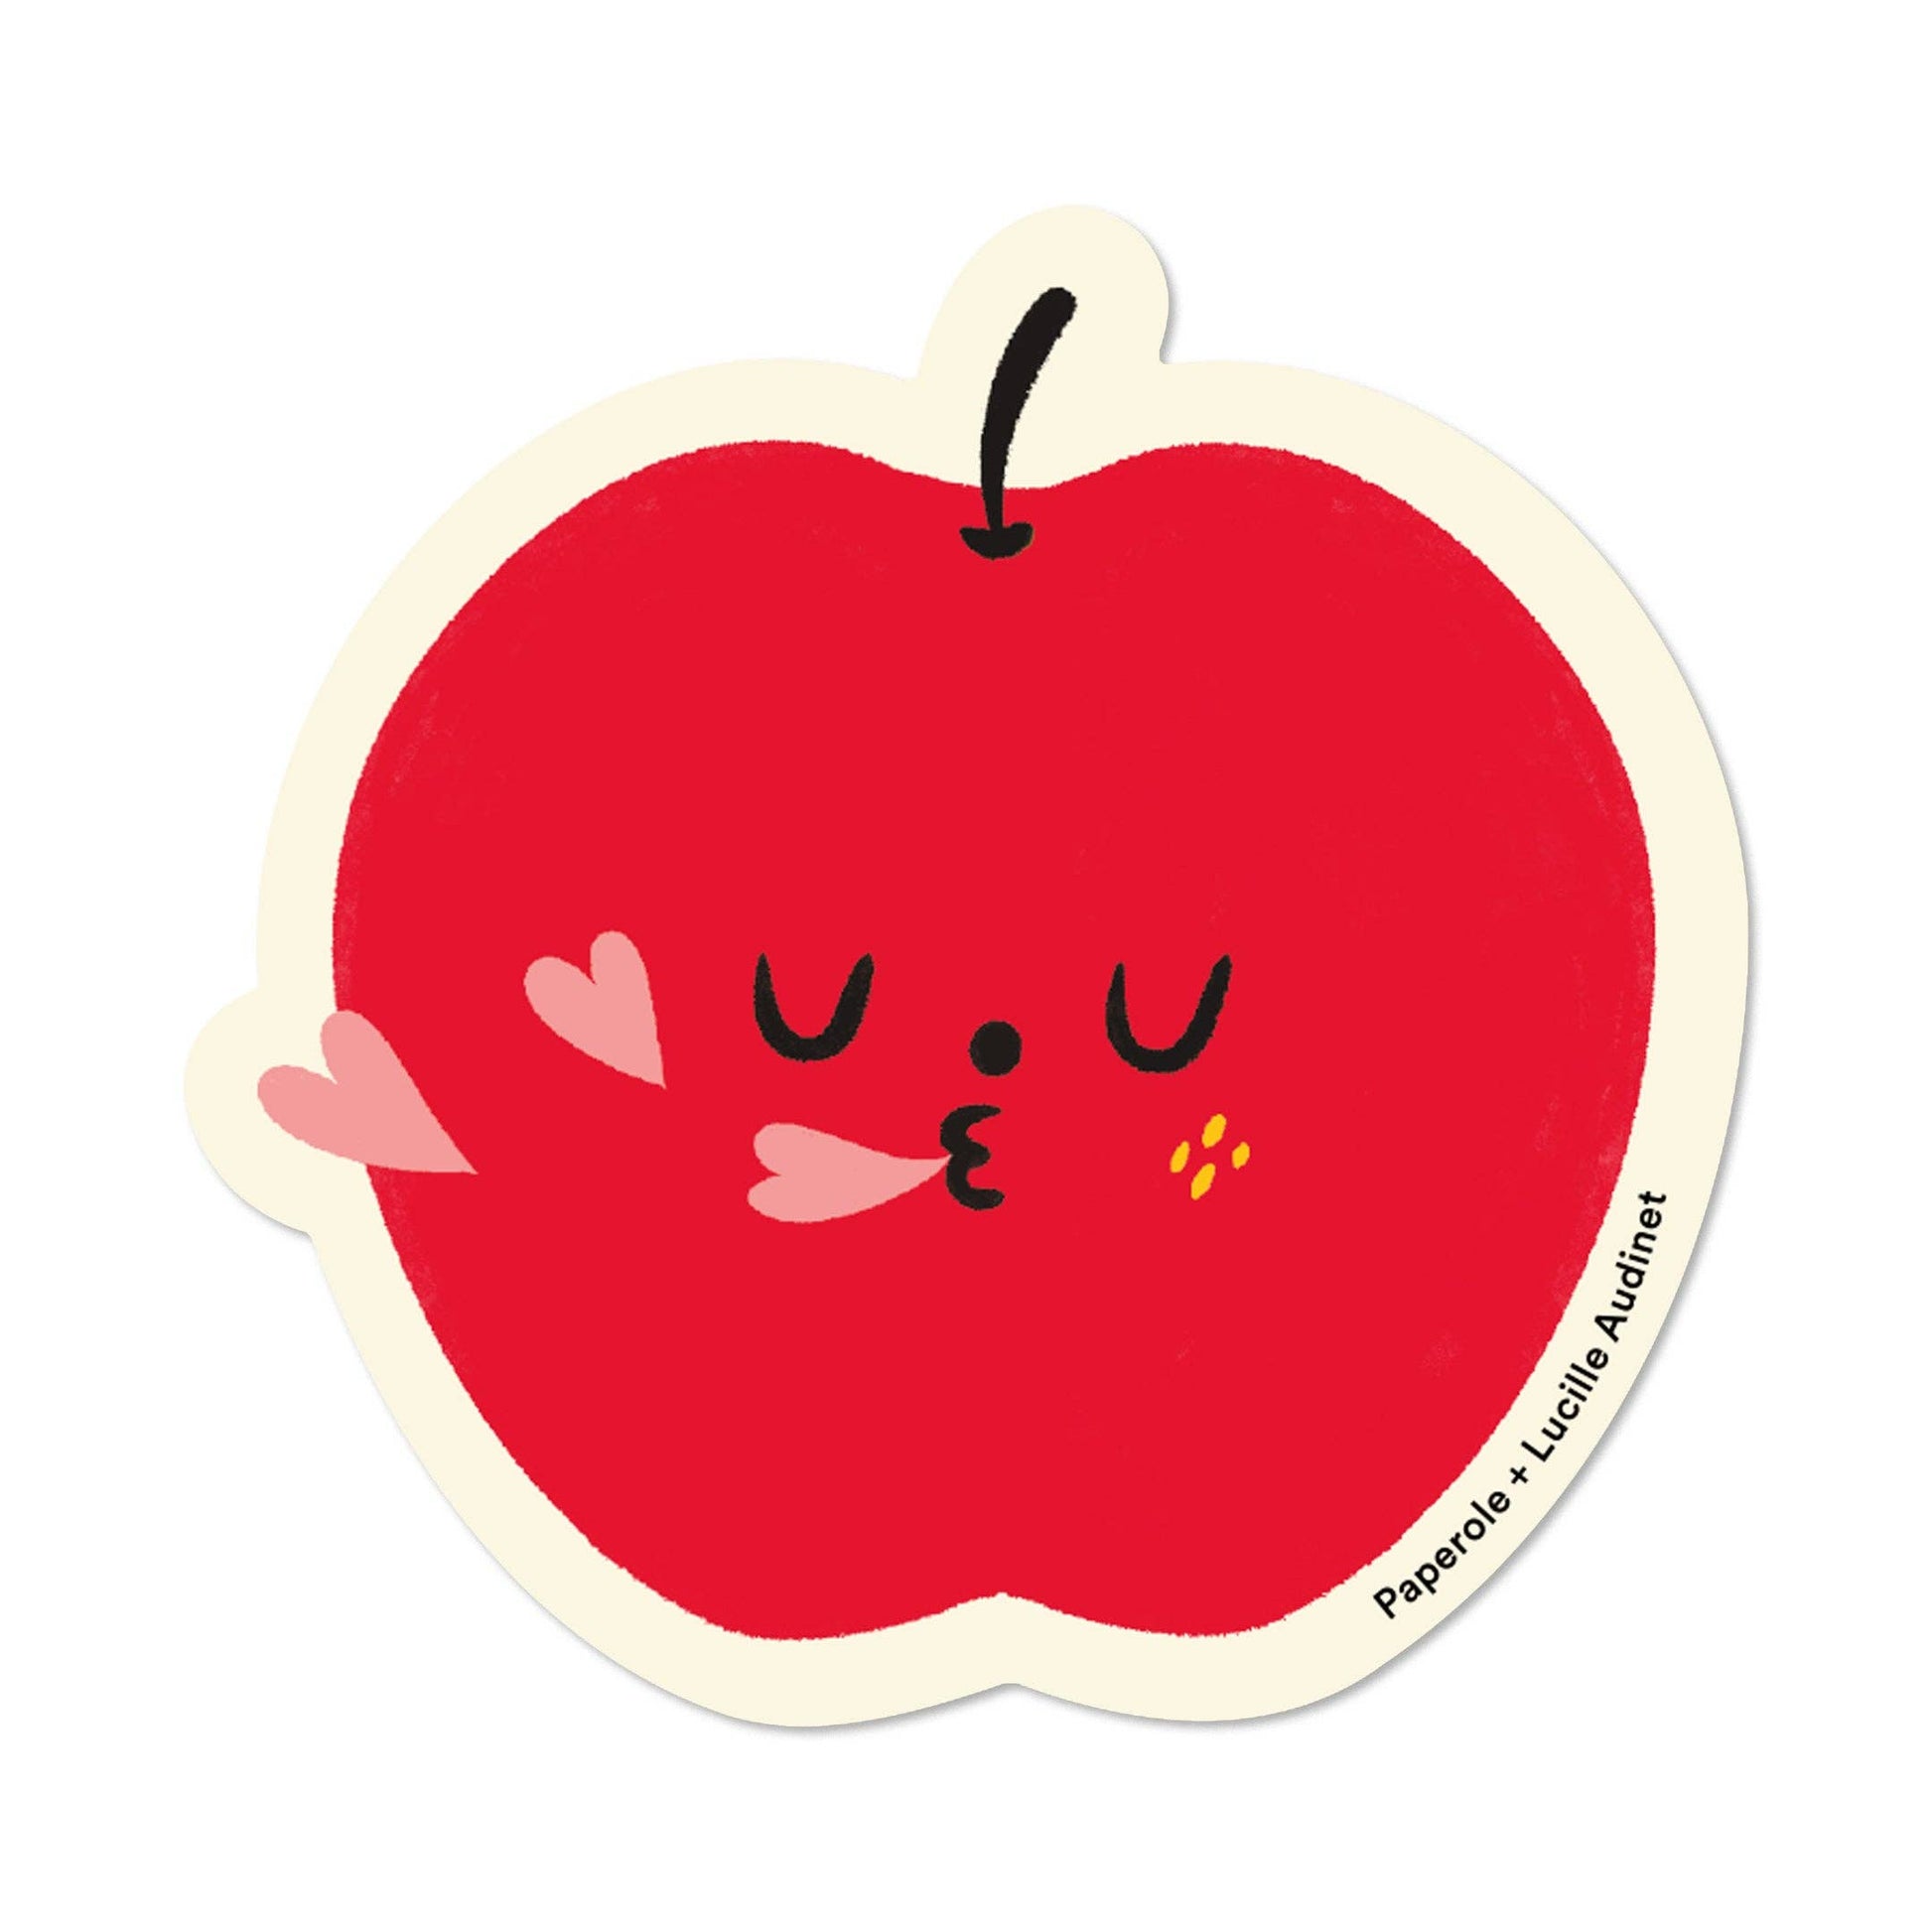 Apple sticker making a kissy face and hearts coming out from the mouth